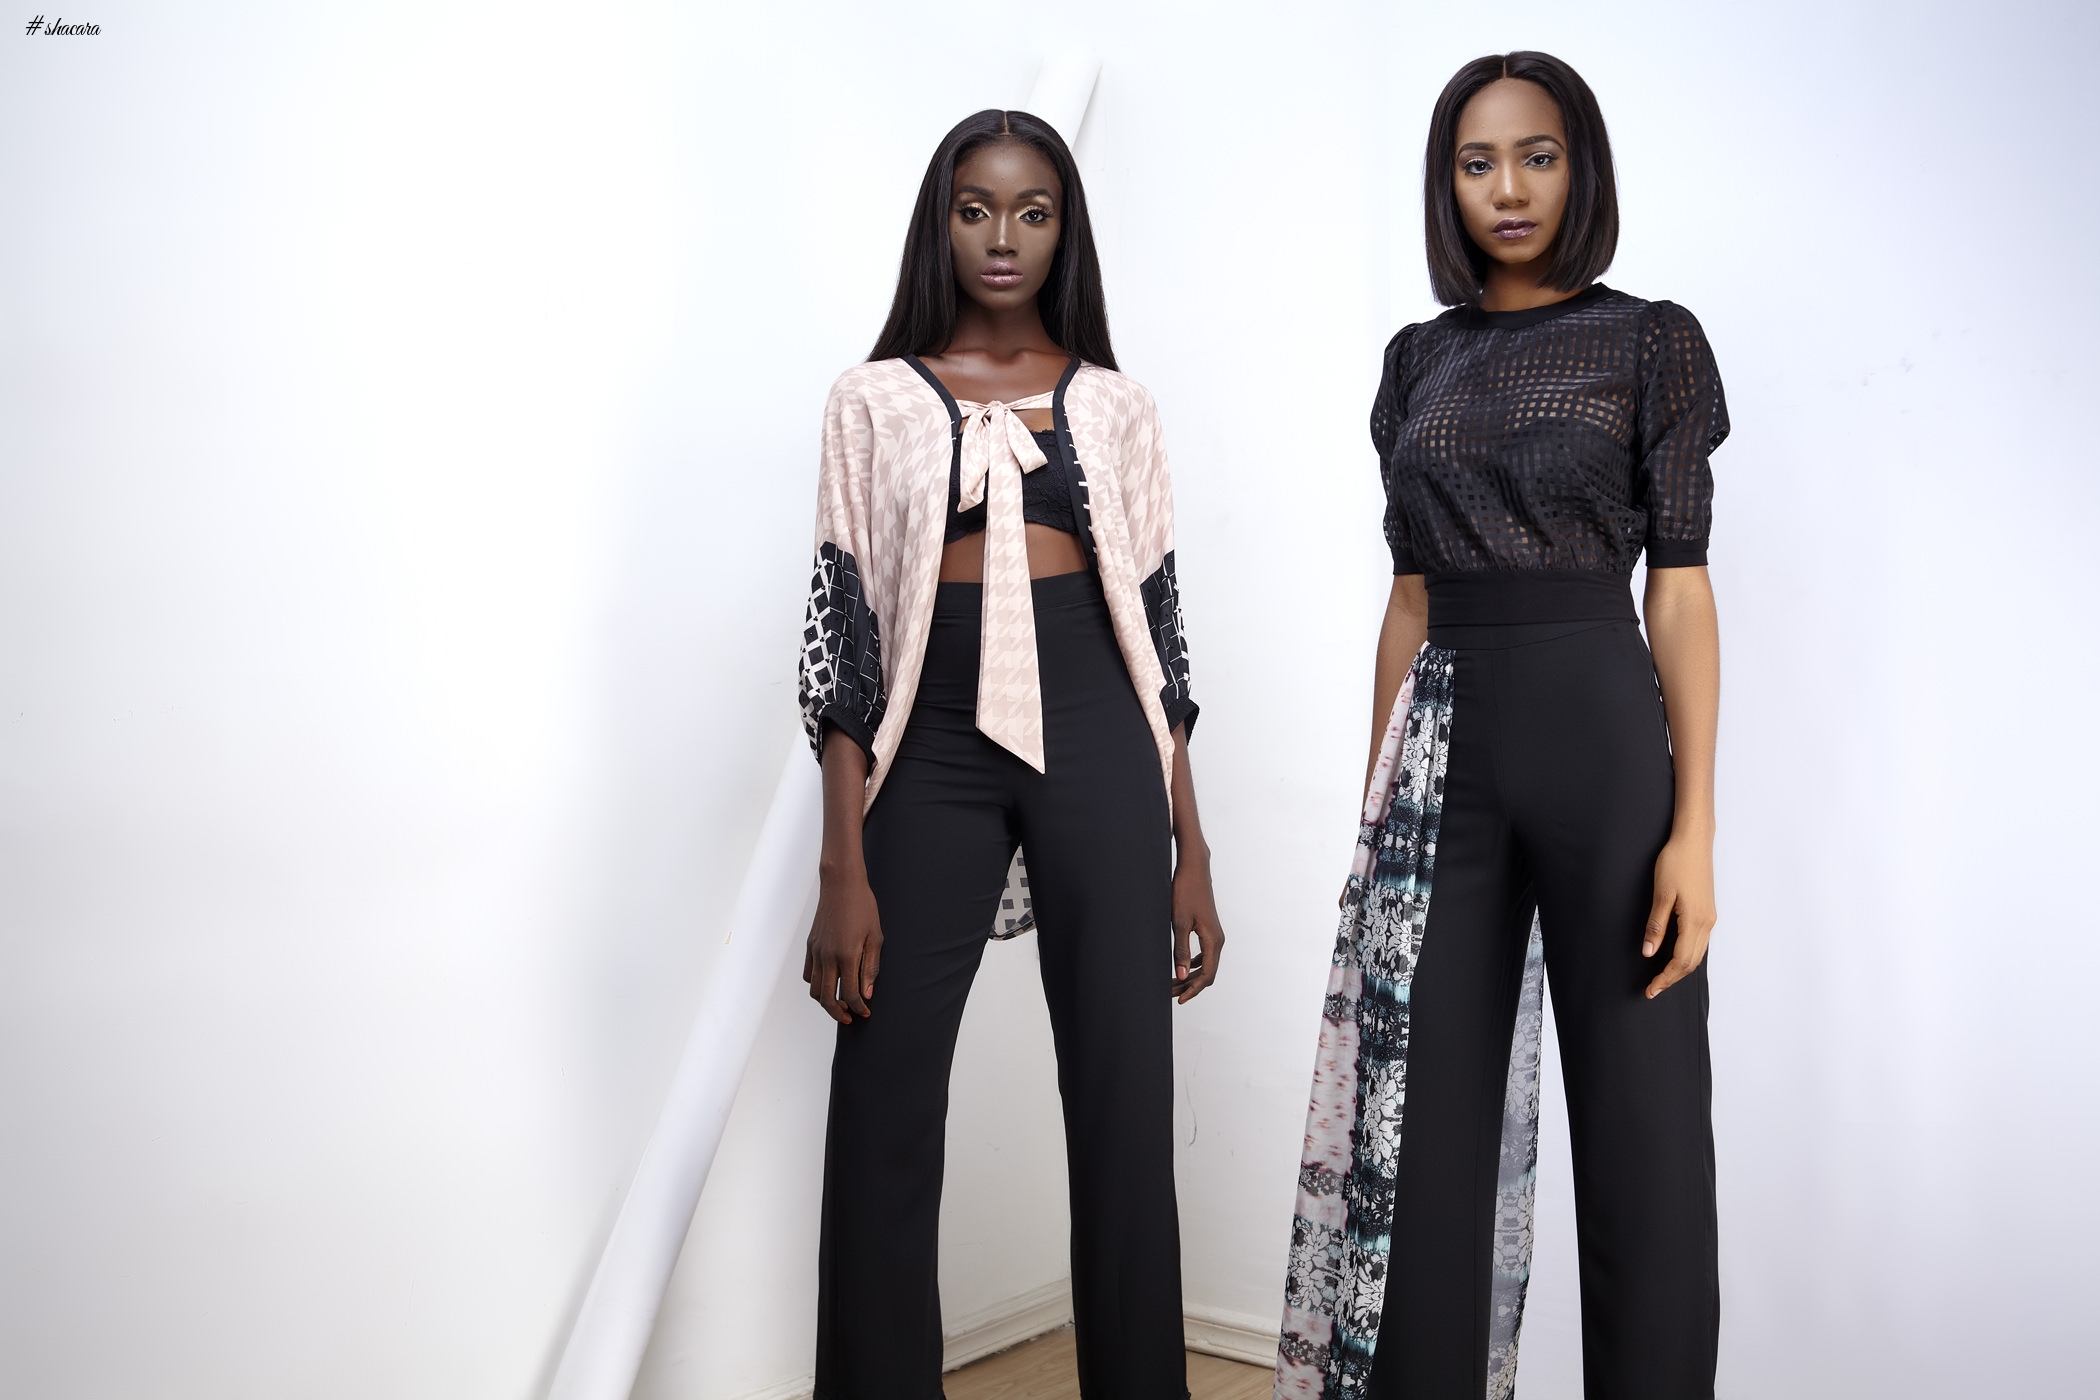 Womenswear Fashion Brand Anne Jacob Returns With Resort 2017 Collection